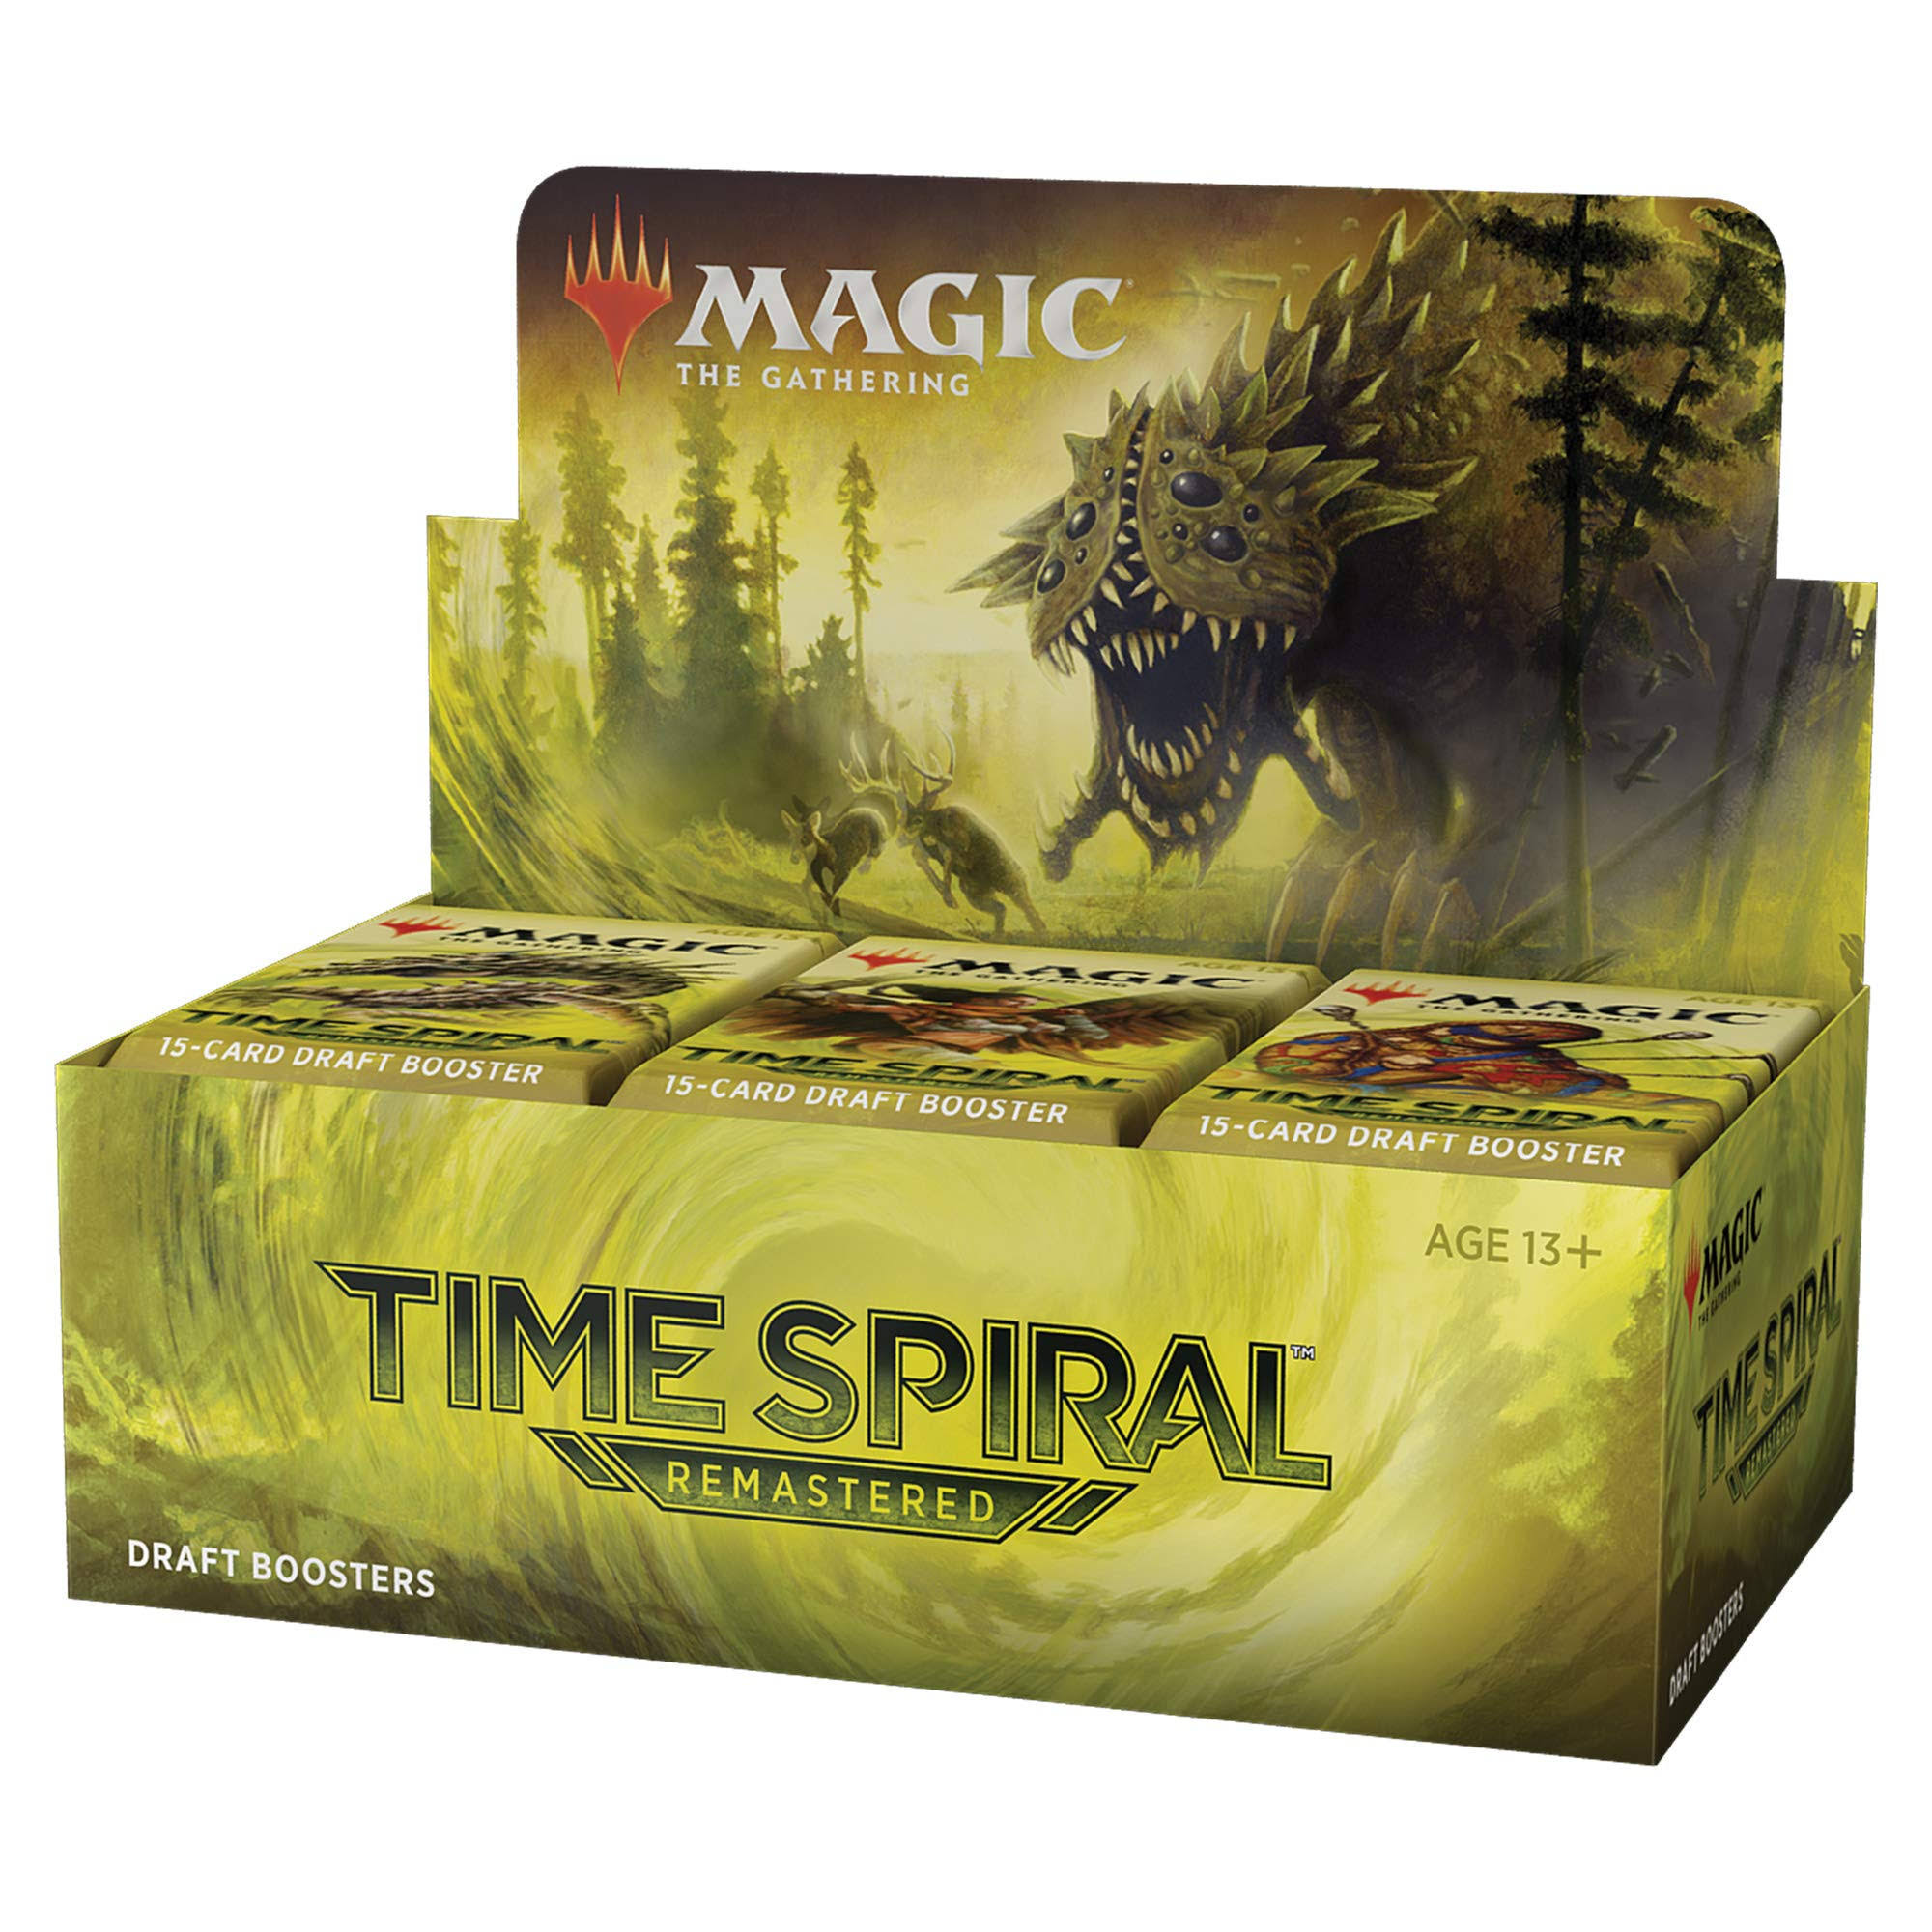 Magic The Gathering Draft Booster Box - Time Spiral Remastered